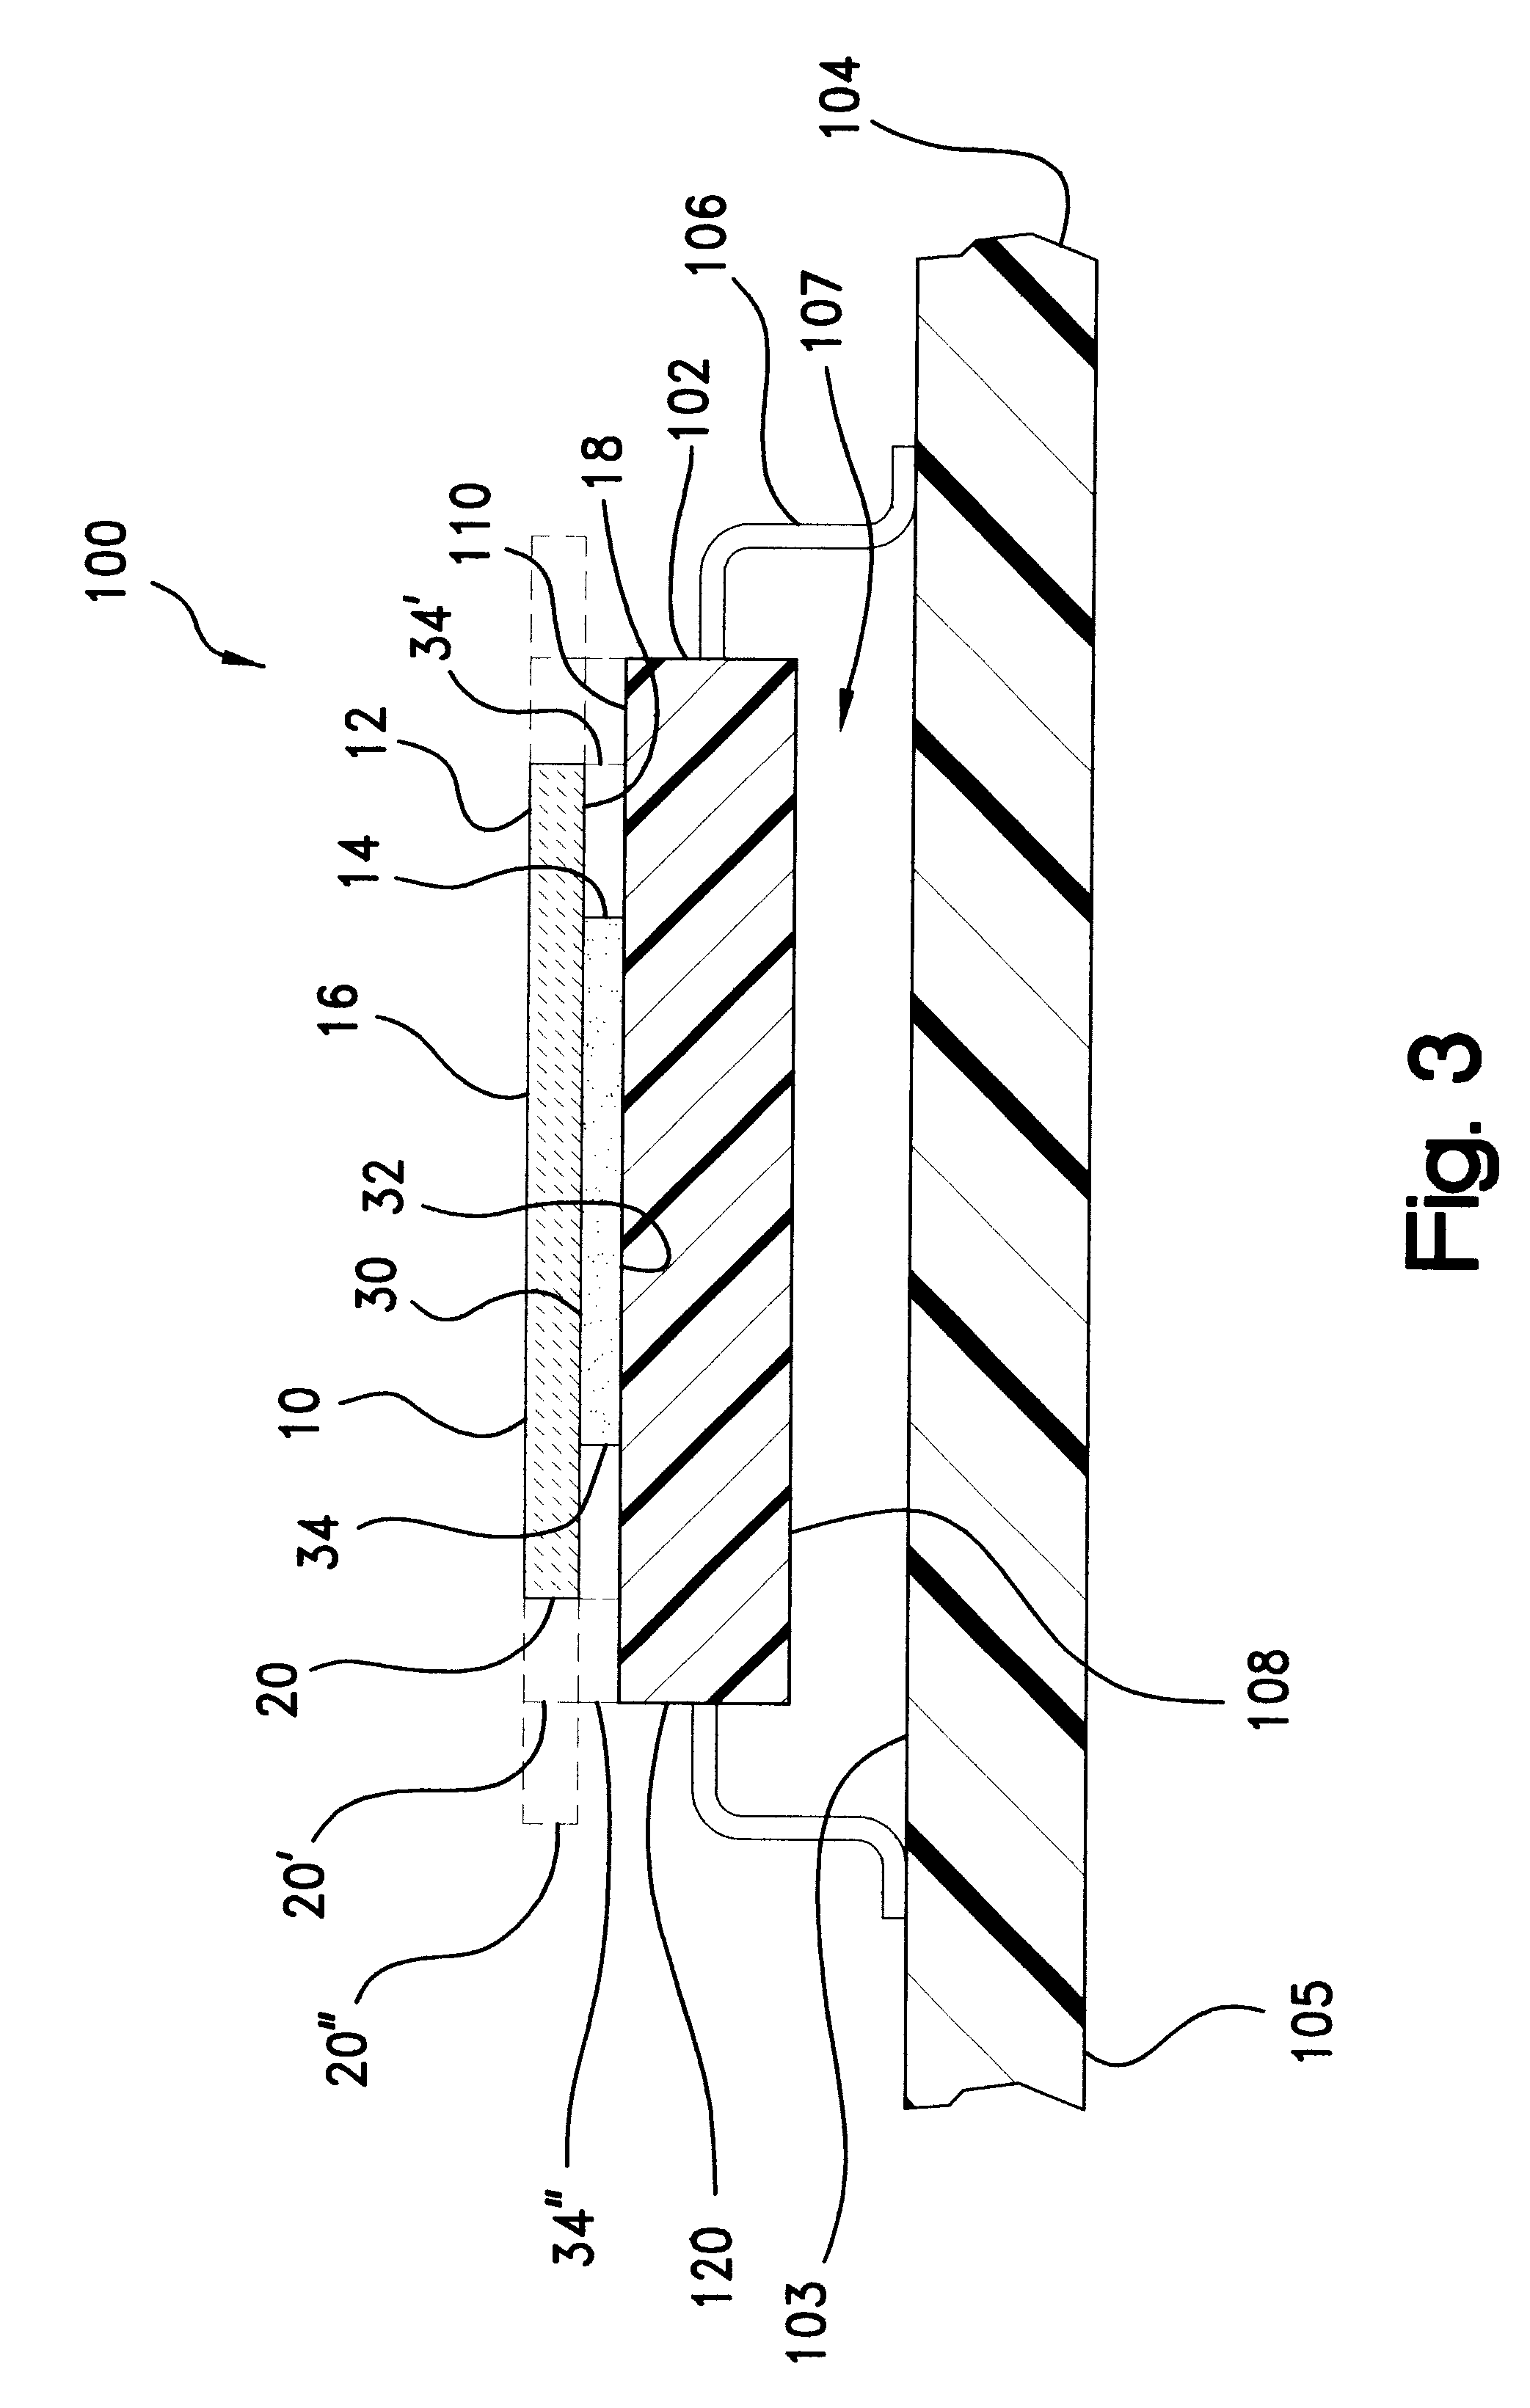 Non-electrically conductive thermal dissipator for electronic components